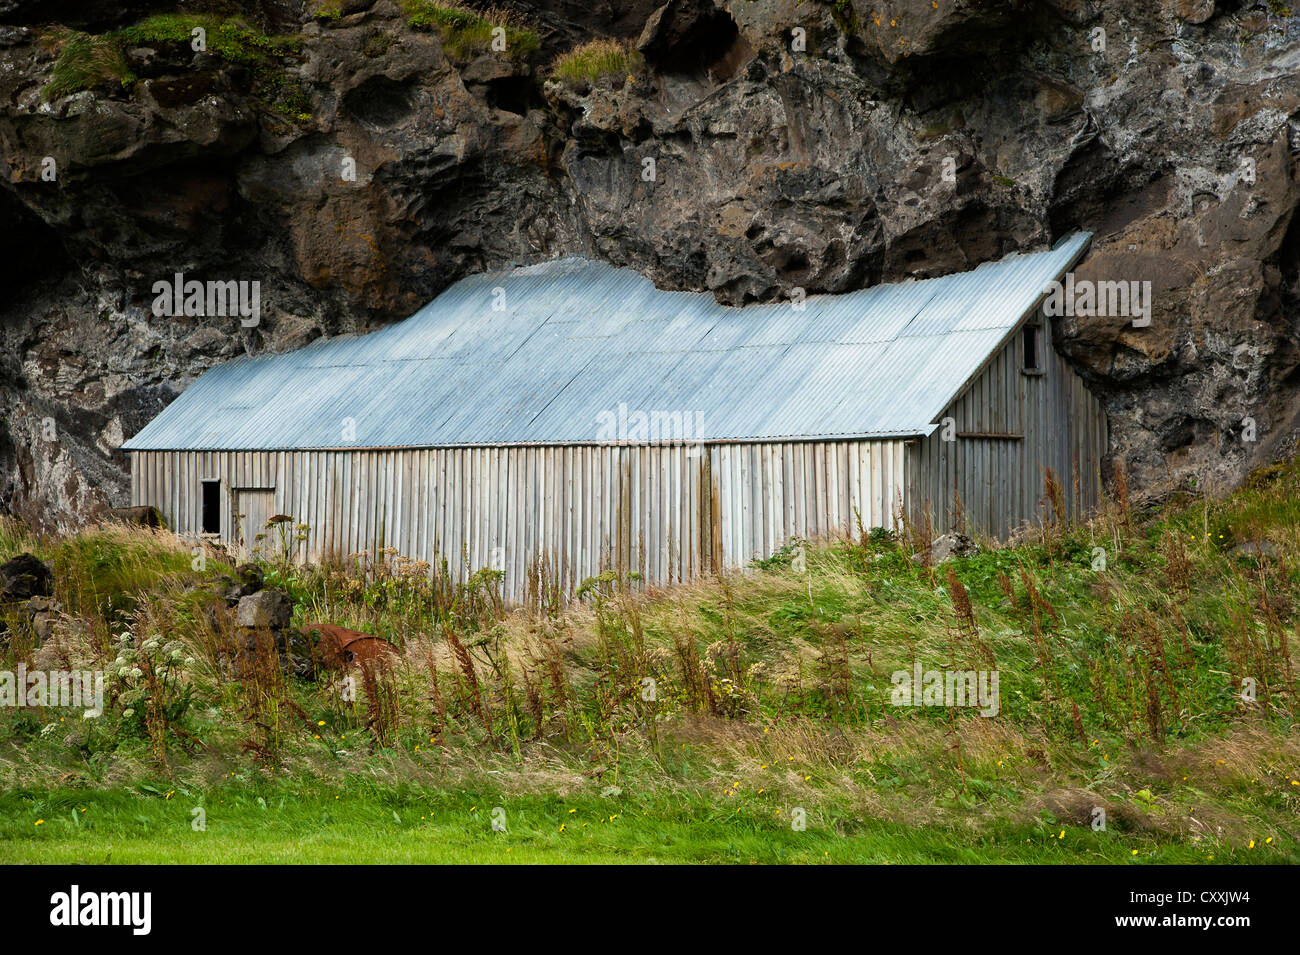 Barn built next to a rock, Austurland, eastern Iceland, Iceland, Europe Stock Photo